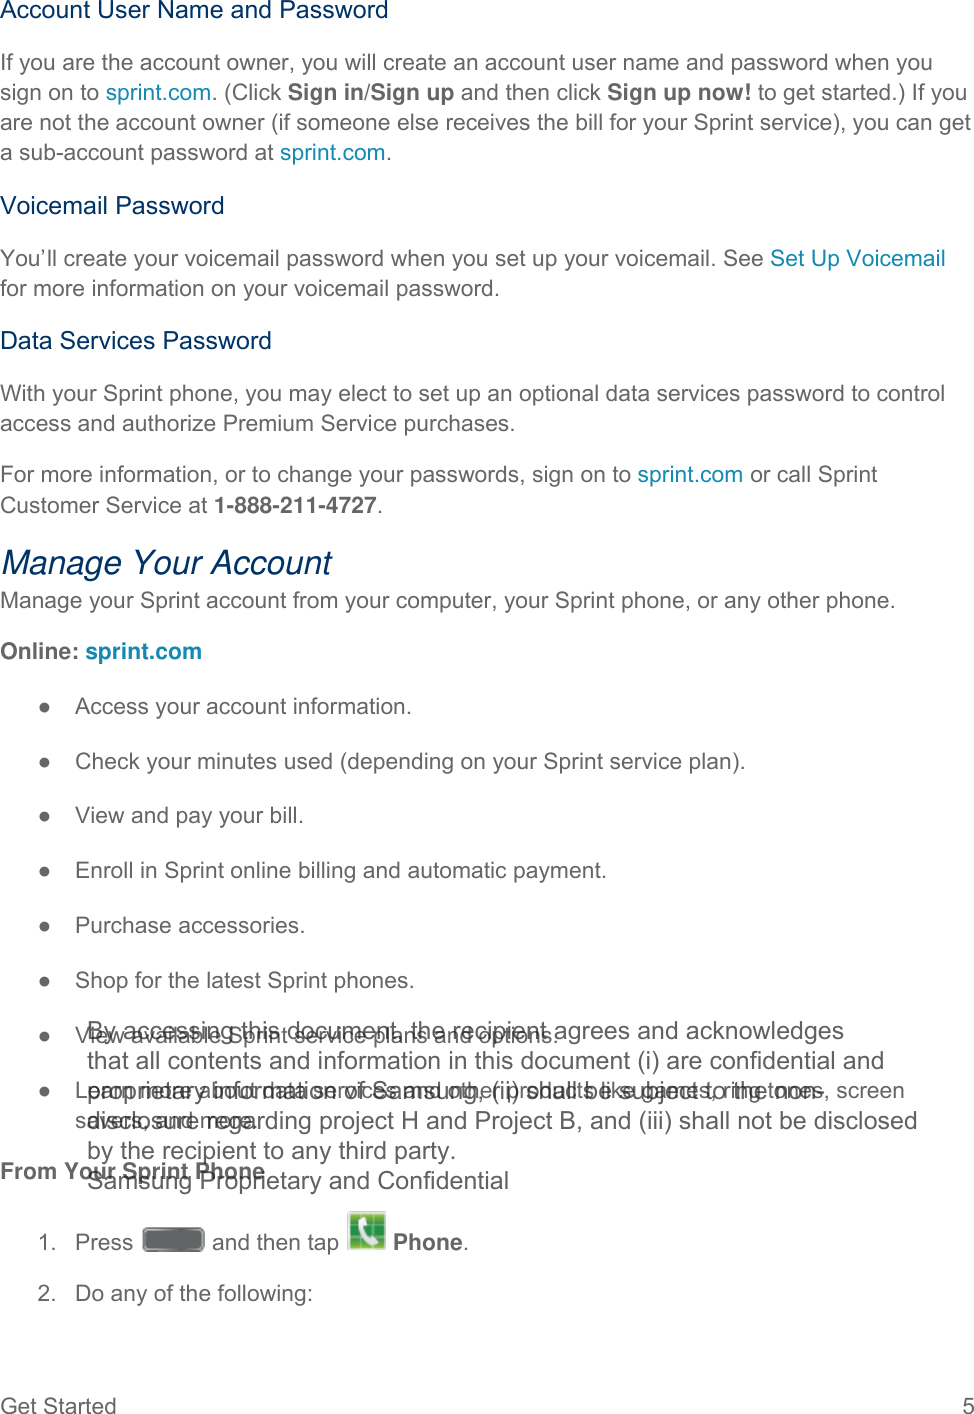 Get Started  5   Account User Name and Password If you are the account owner, you will create an account user name and password when you sign on to sprint.com. (Click Sign in/Sign up and then click Sign up now! to get started.) If you are not the account owner (if someone else receives the bill for your Sprint service), you can get a sub-account password at sprint.com. Voicemail Password You’ll create your voicemail password when you set up your voicemail. See Set Up Voicemail for more information on your voicemail password. Data Services Password With your Sprint phone, you may elect to set up an optional data services password to control access and authorize Premium Service purchases. For more information, or to change your passwords, sign on to sprint.com or call Sprint Customer Service at 1-888-211-4727. Manage Your Account Manage your Sprint account from your computer, your Sprint phone, or any other phone. Online: sprint.com ● Access your account information. ● Check your minutes used (depending on your Sprint service plan). ● View and pay your bill. ● Enroll in Sprint online billing and automatic payment. ● Purchase accessories. ● Shop for the latest Sprint phones. ● View available Sprint service plans and options. ● Learn more about data services and other products like games, ring tones, screen savers, and more. From Your Sprint Phone 1.  Press   and then tap   Phone.  2. Do any of the following: By accessing this document, the recipient agrees and acknowledges that all contents and information in this document (i) are confidential and proprietary information of Samsung, (ii) shall be subject to the non- disclosure regarding project H and Project B, and (iii) shall not be disclosed by the recipient to any third party. Samsung Proprietary and Confidential 